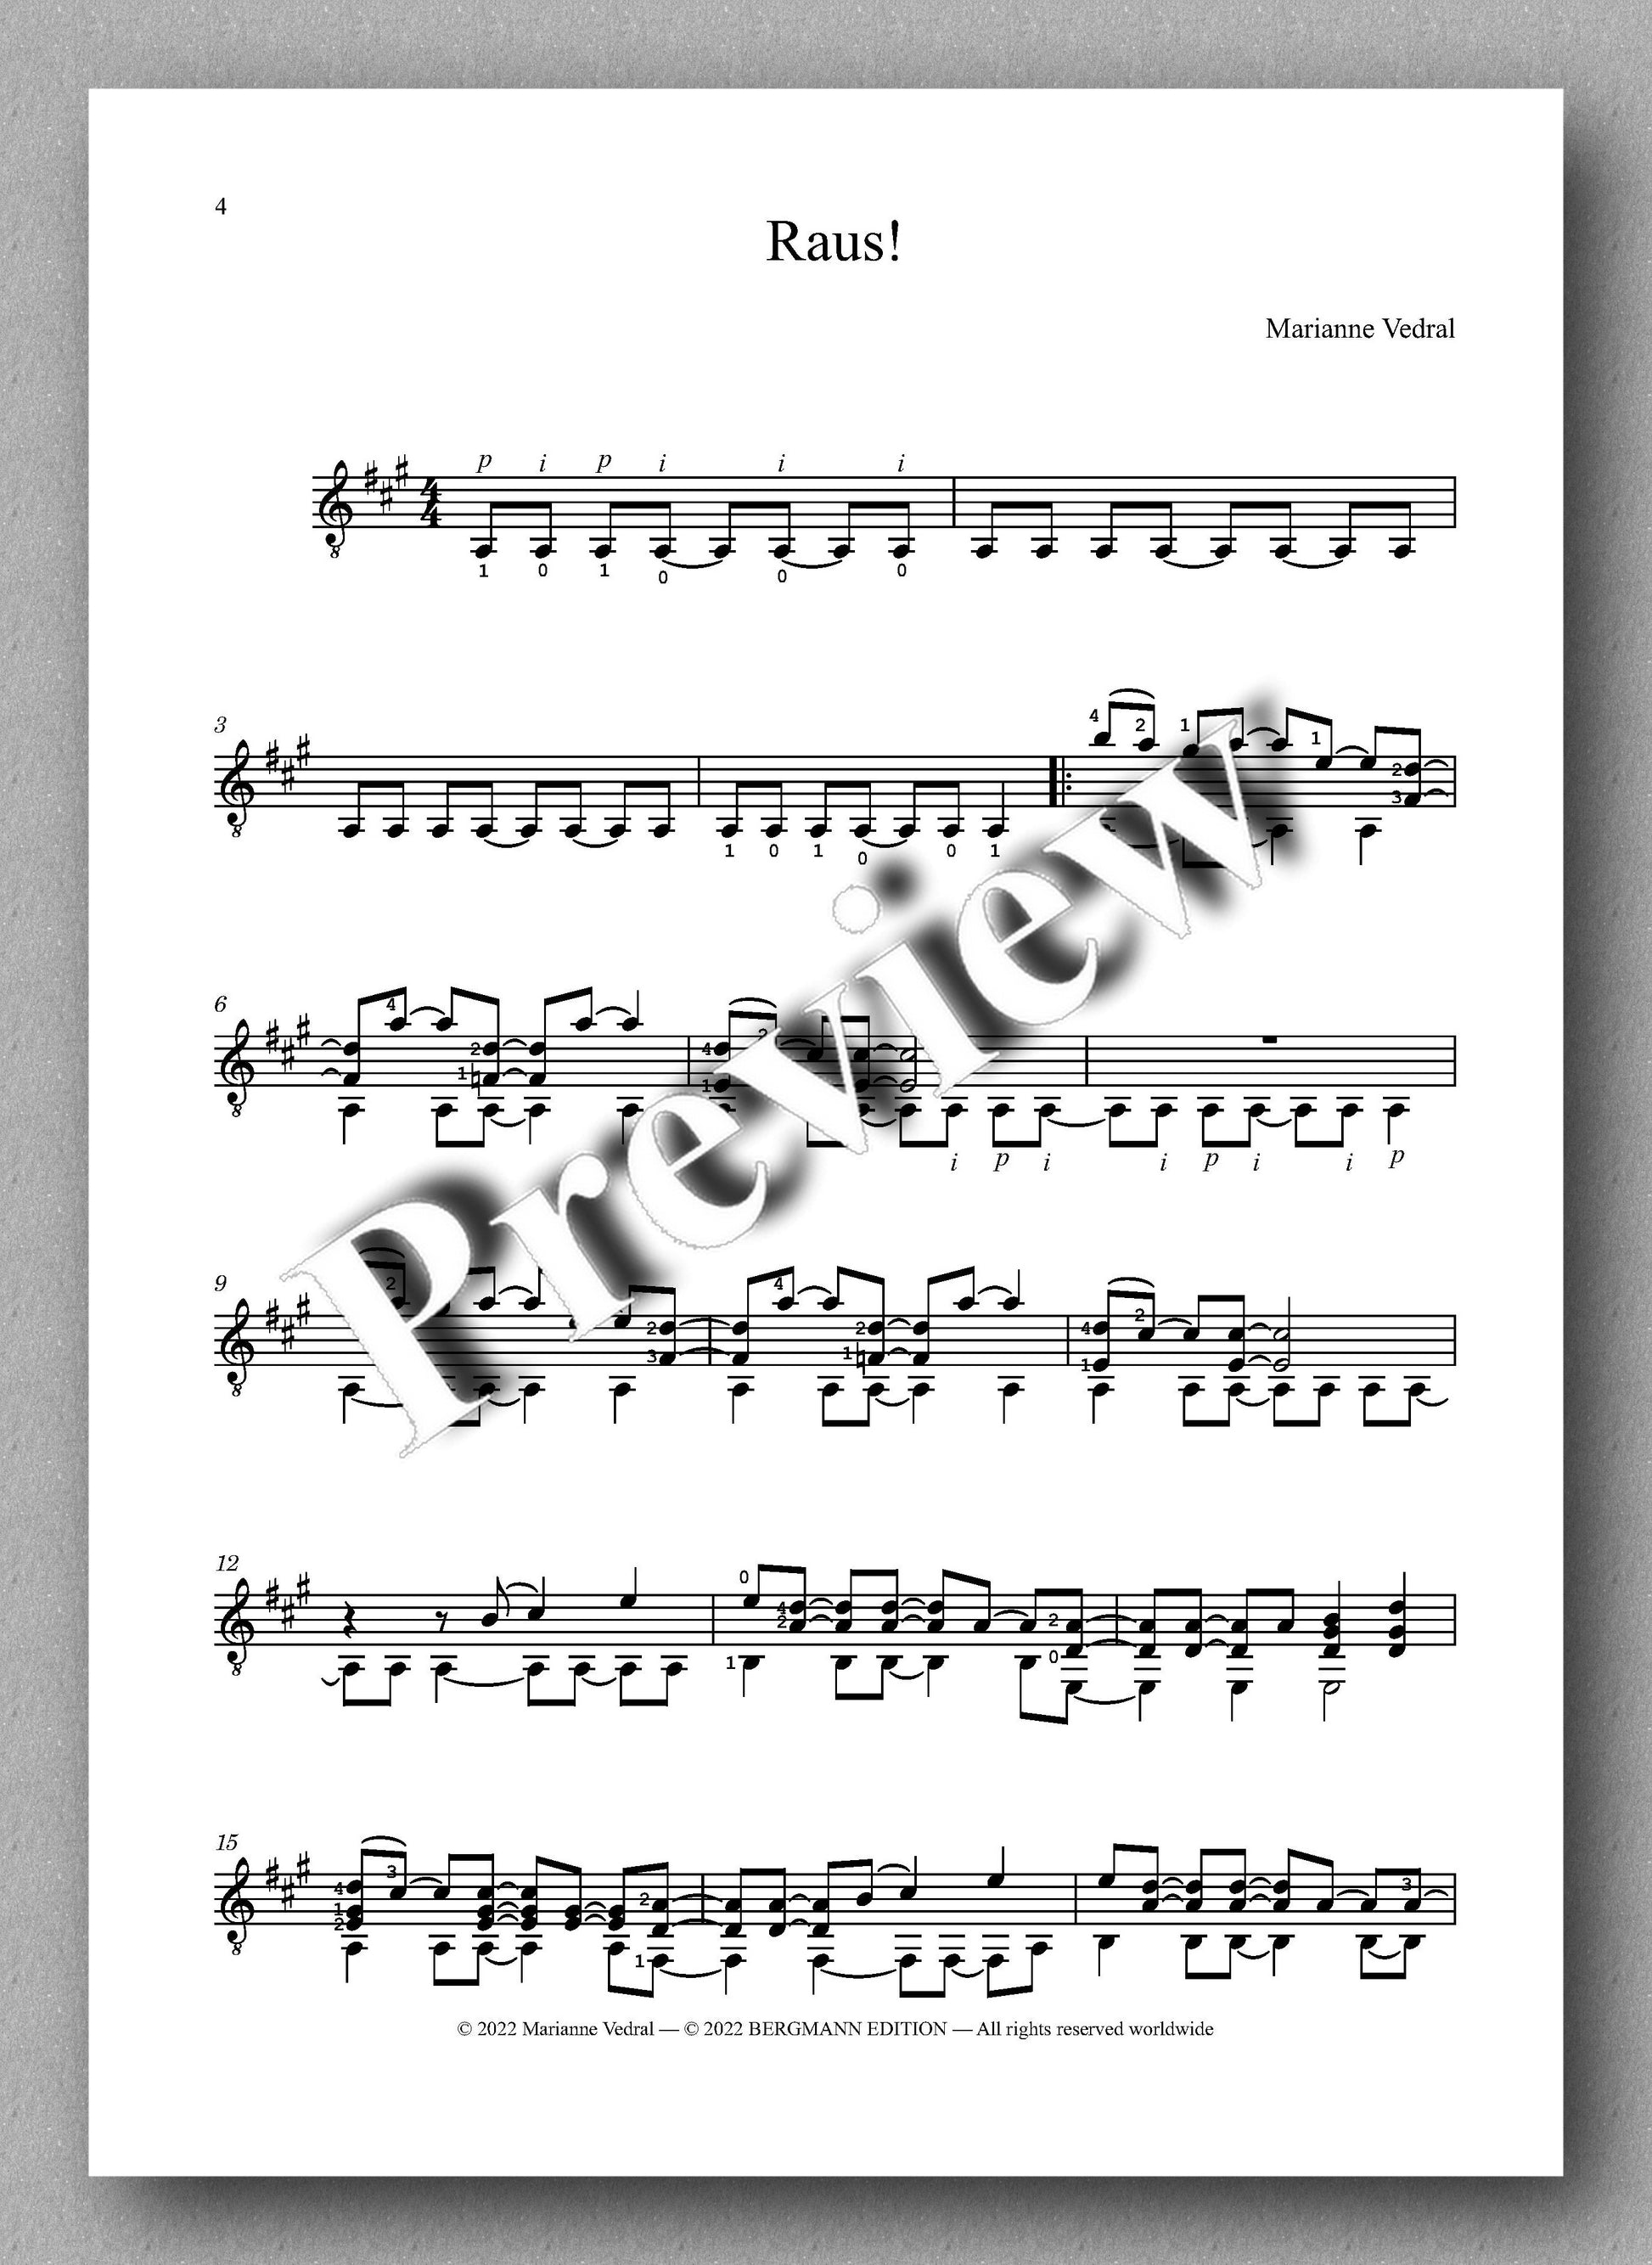 Vedral, Raus - preview of the music score.